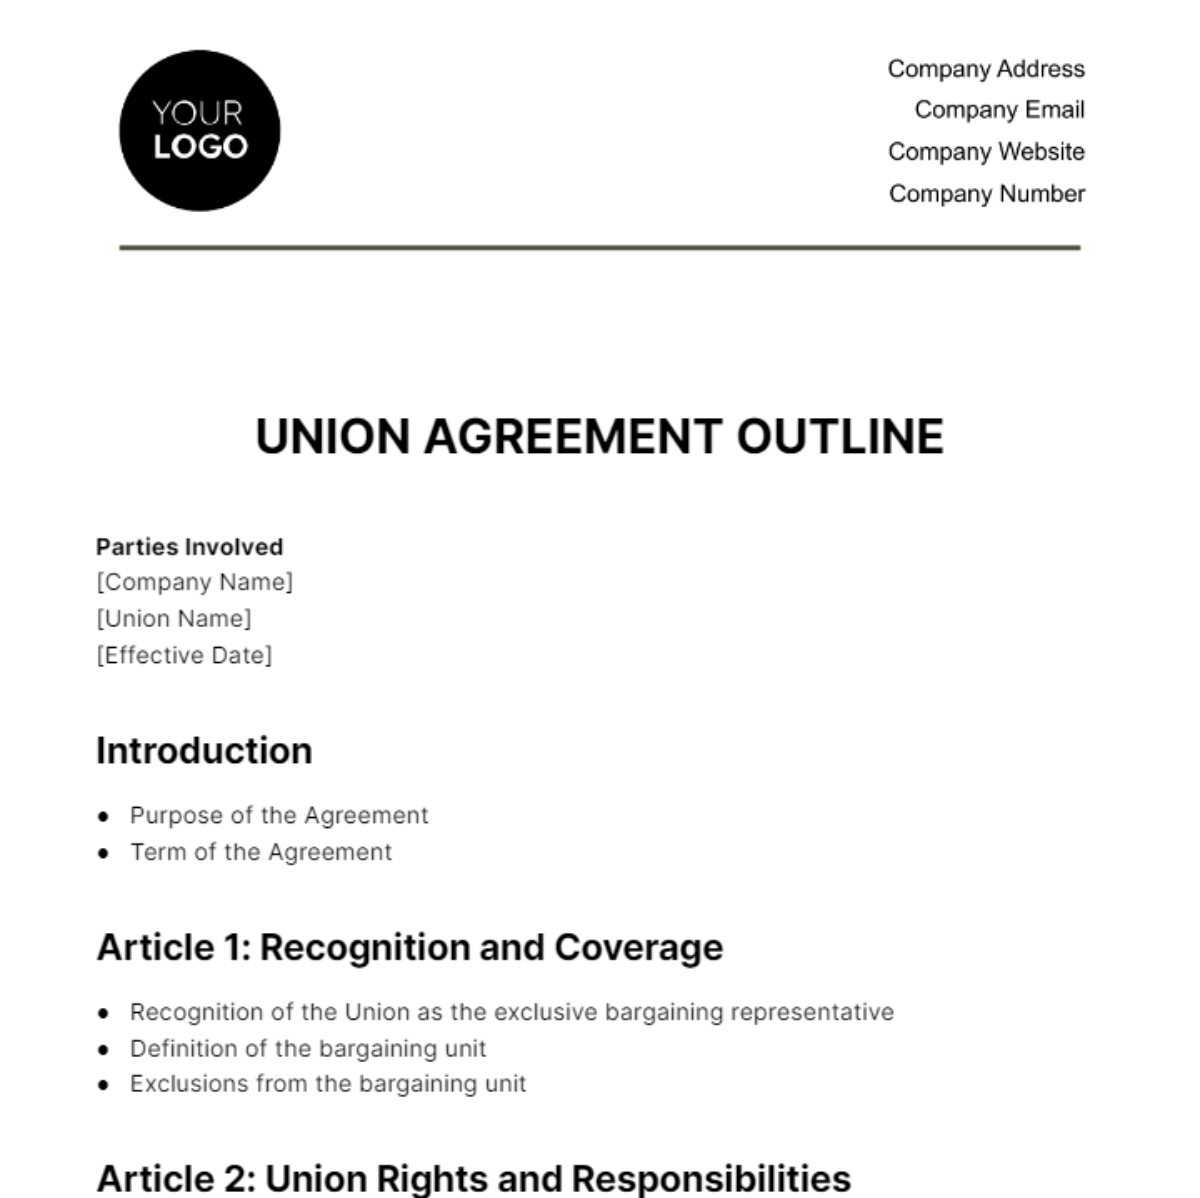 Free Union Agreement Outline HR Template